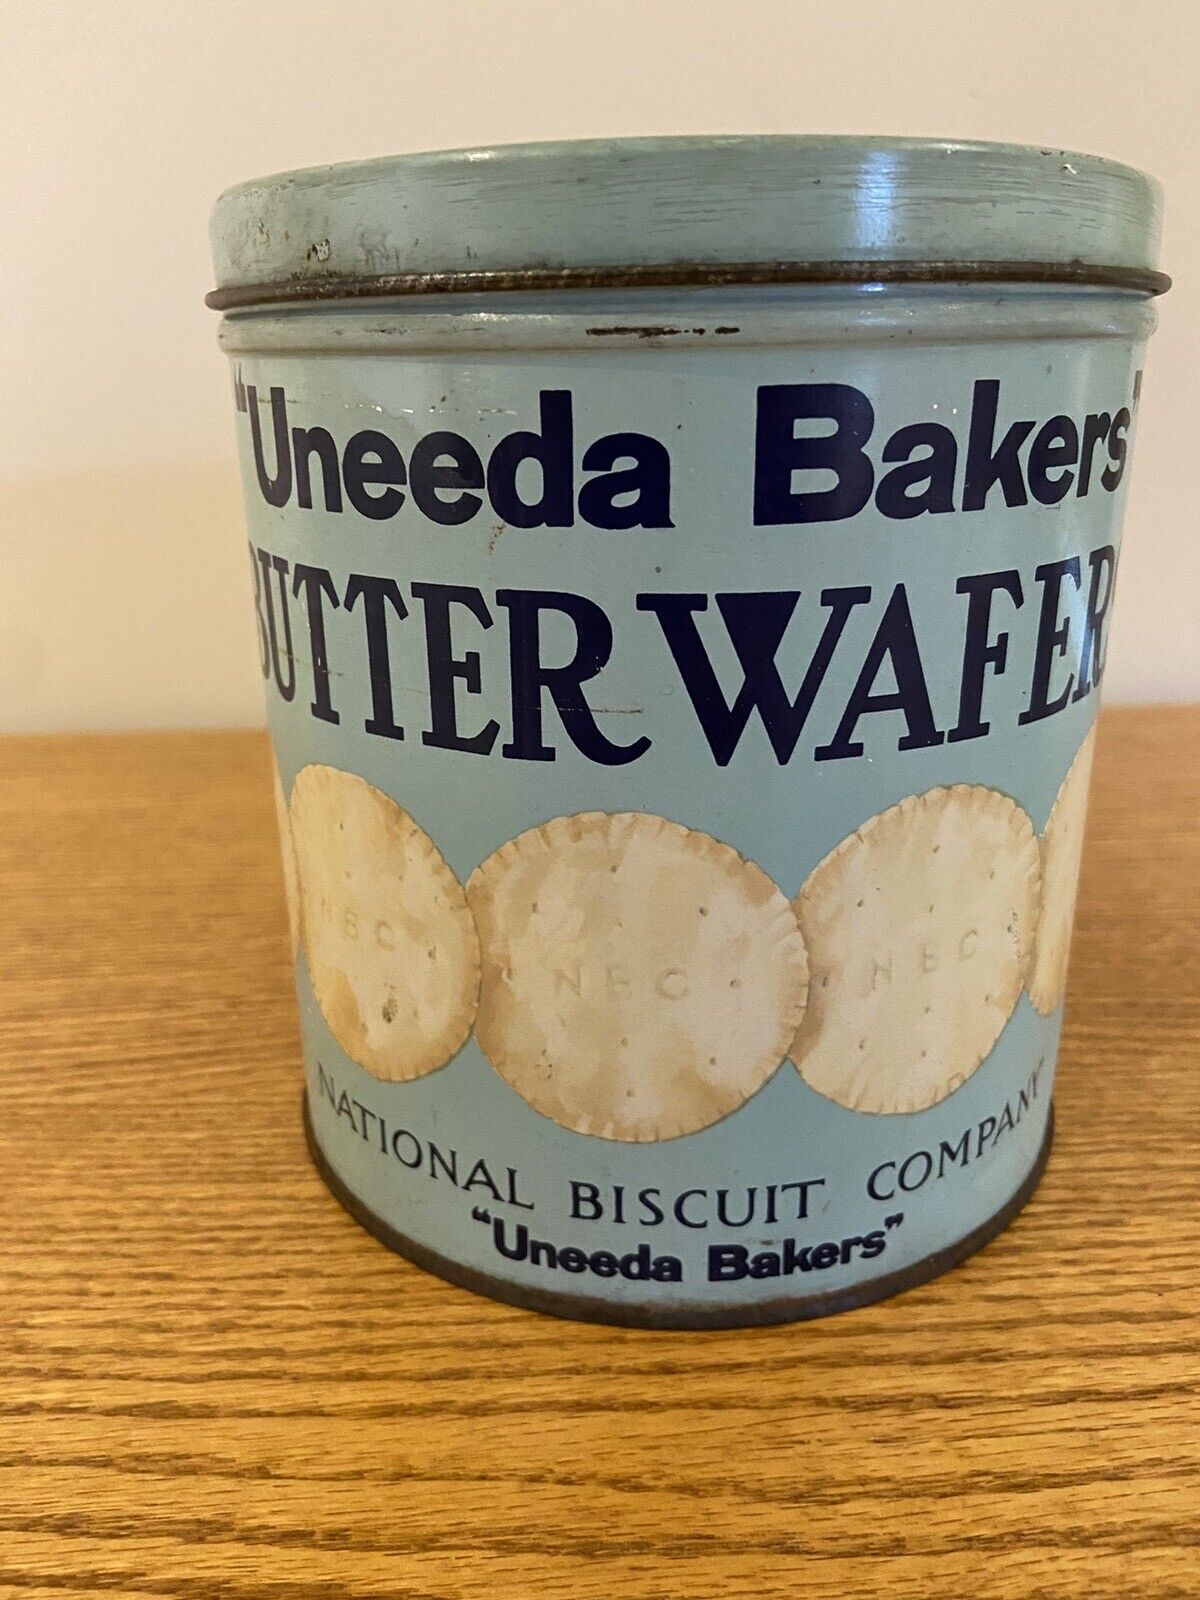 Antique Vintage Uneeda Bakers Butter Wafers National Biscuit Company Tin